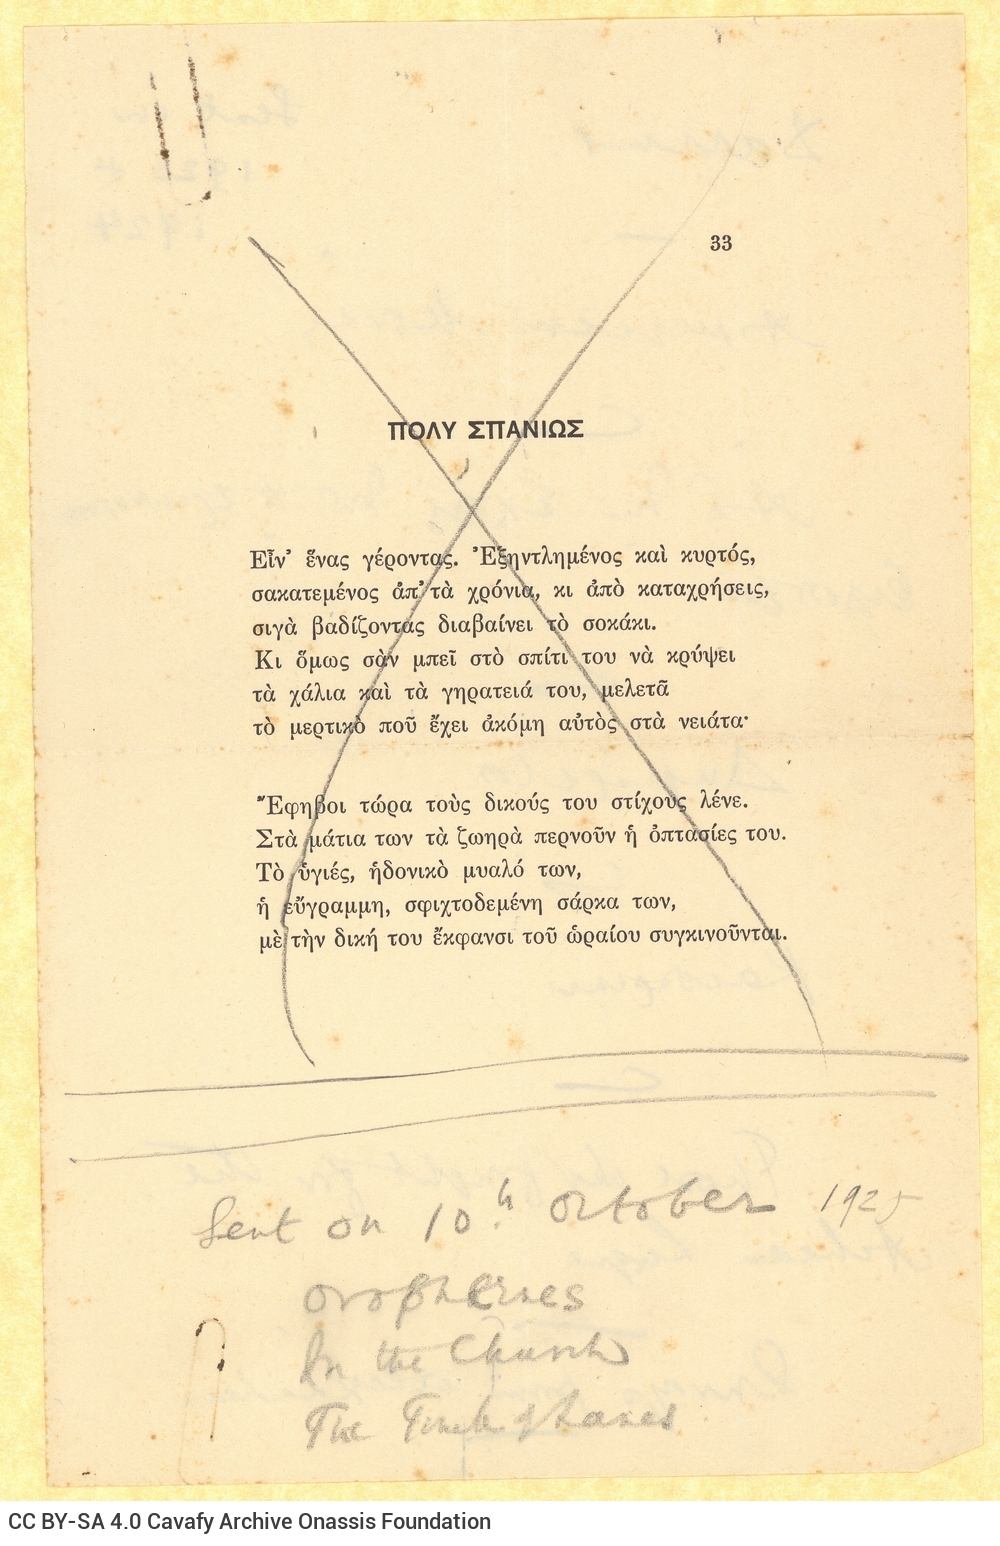 Manuscript with English titles of poems on one side of a piece of paper. At top right, the note that they have been sent t